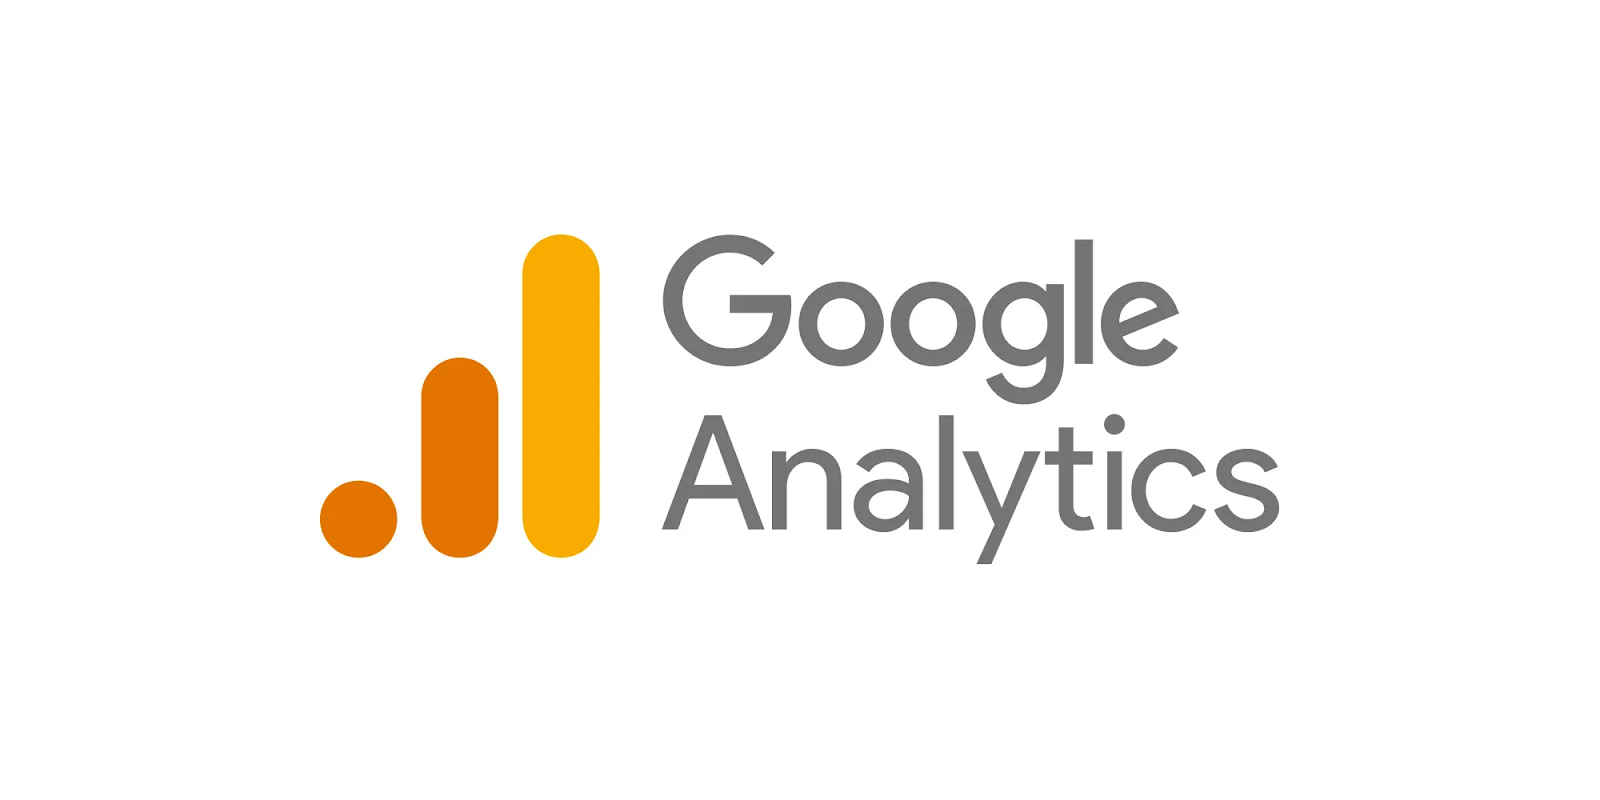 google analytics tool for conversion rate optimization